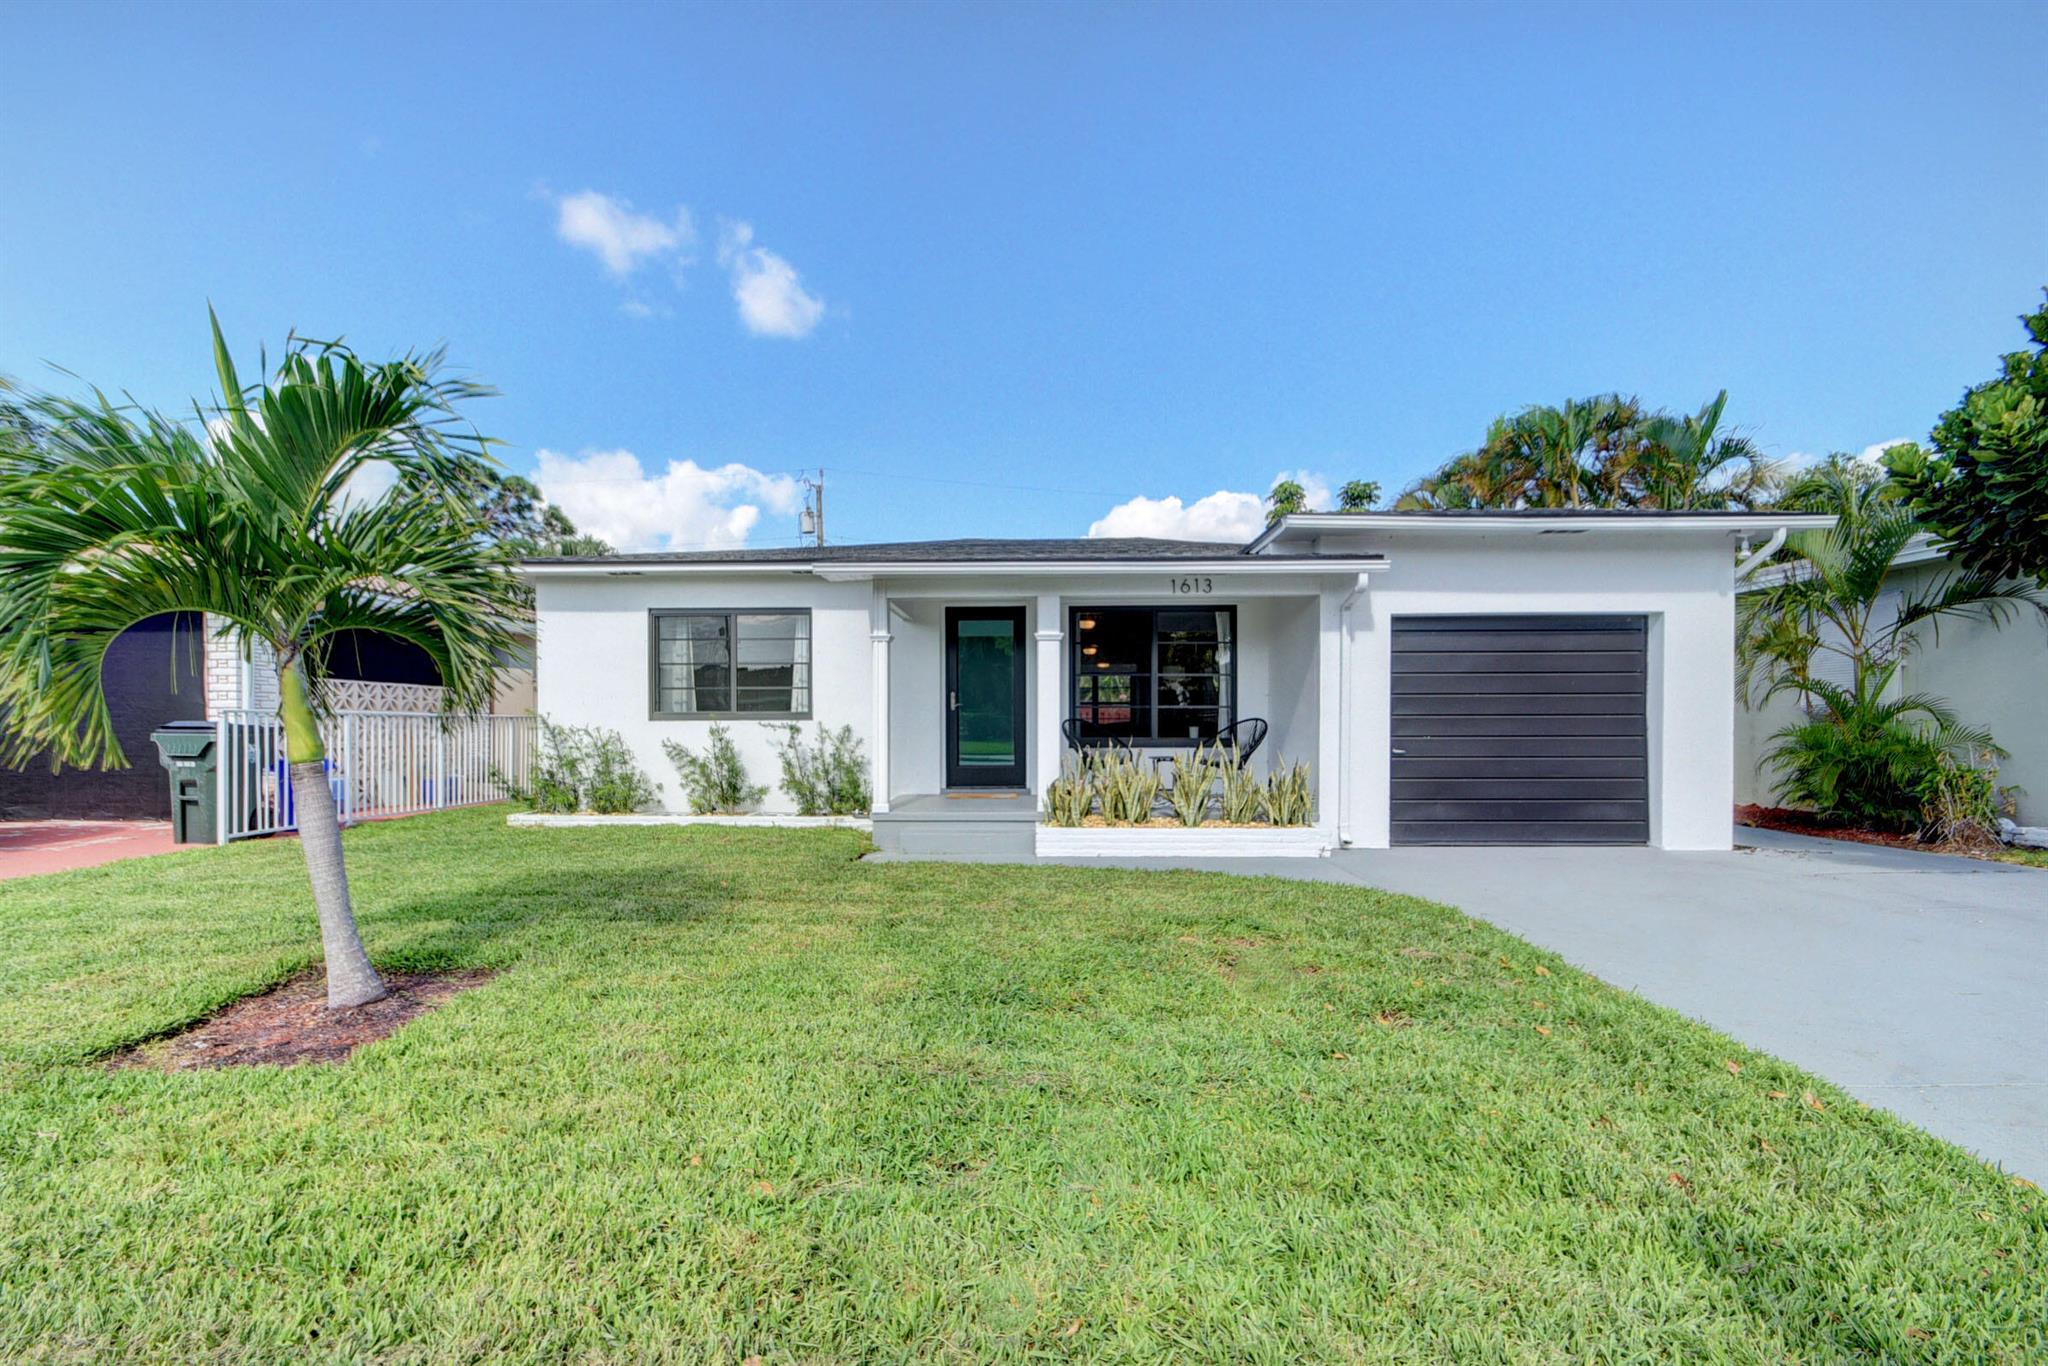 Welcome to your dream home in the heart of Lake Worth Beach! This charming 2 BR/2 bath was recently remodeled in 2022. Enjoy peace of mind with a new roof, impact windows, and tankless hot water heater, all installed in 2022, and stay cool with the new air conditioner added in 2023. Outdoor living is a delight with a large open patio, ideal for entertaining or relaxing under the Florida sun. The expansive fenced yard provides ample space and is ready for you to add a pool, creating your own private oasis. This home perfectly blends modern updates with comfortable living, making it a must-see in Lake Worth Beach.